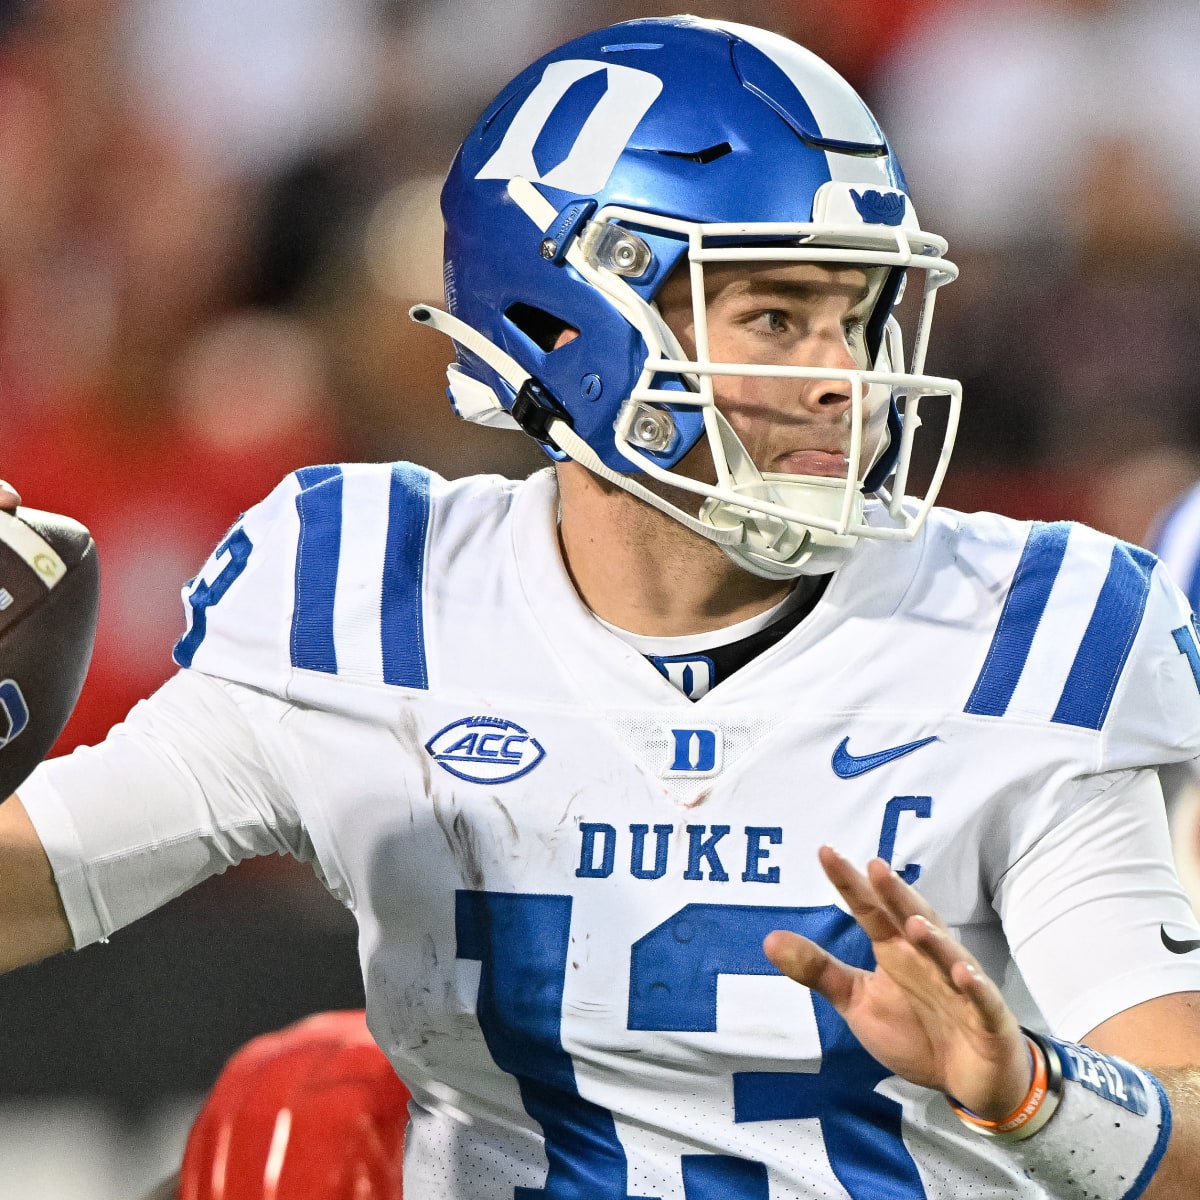 COMMITTED: Duke QB Riley Leonard is transferring to the University of Notre  Dame, he announced! #GoIrish ☘️ ‎ Leonard, widely regarded as…